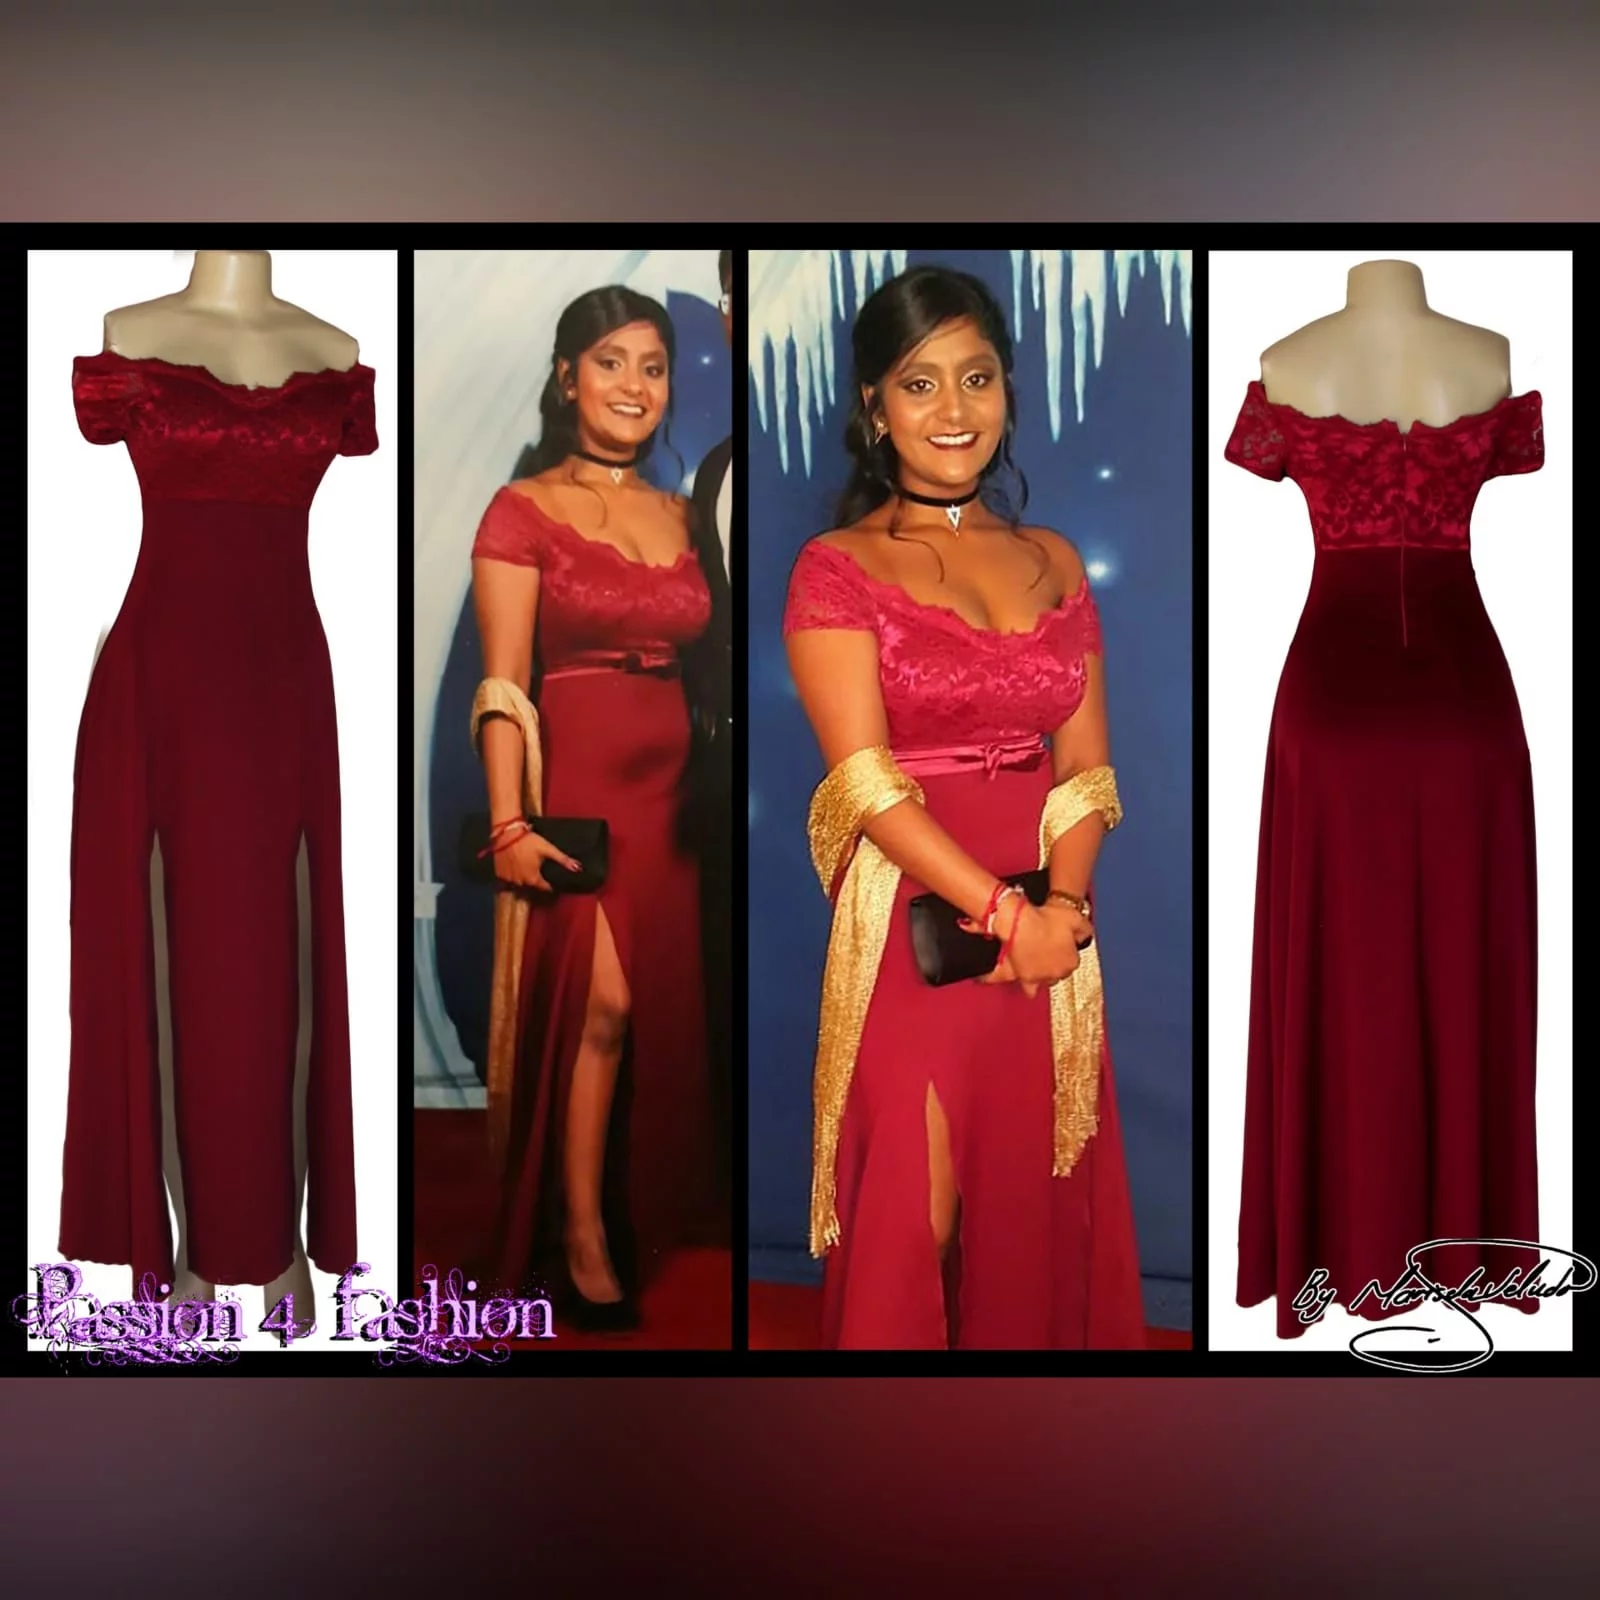 Maroon double slit matric dance dress 2 maroon double slit matric dance dress with an off shoulder lace bodice and a detachable belt.